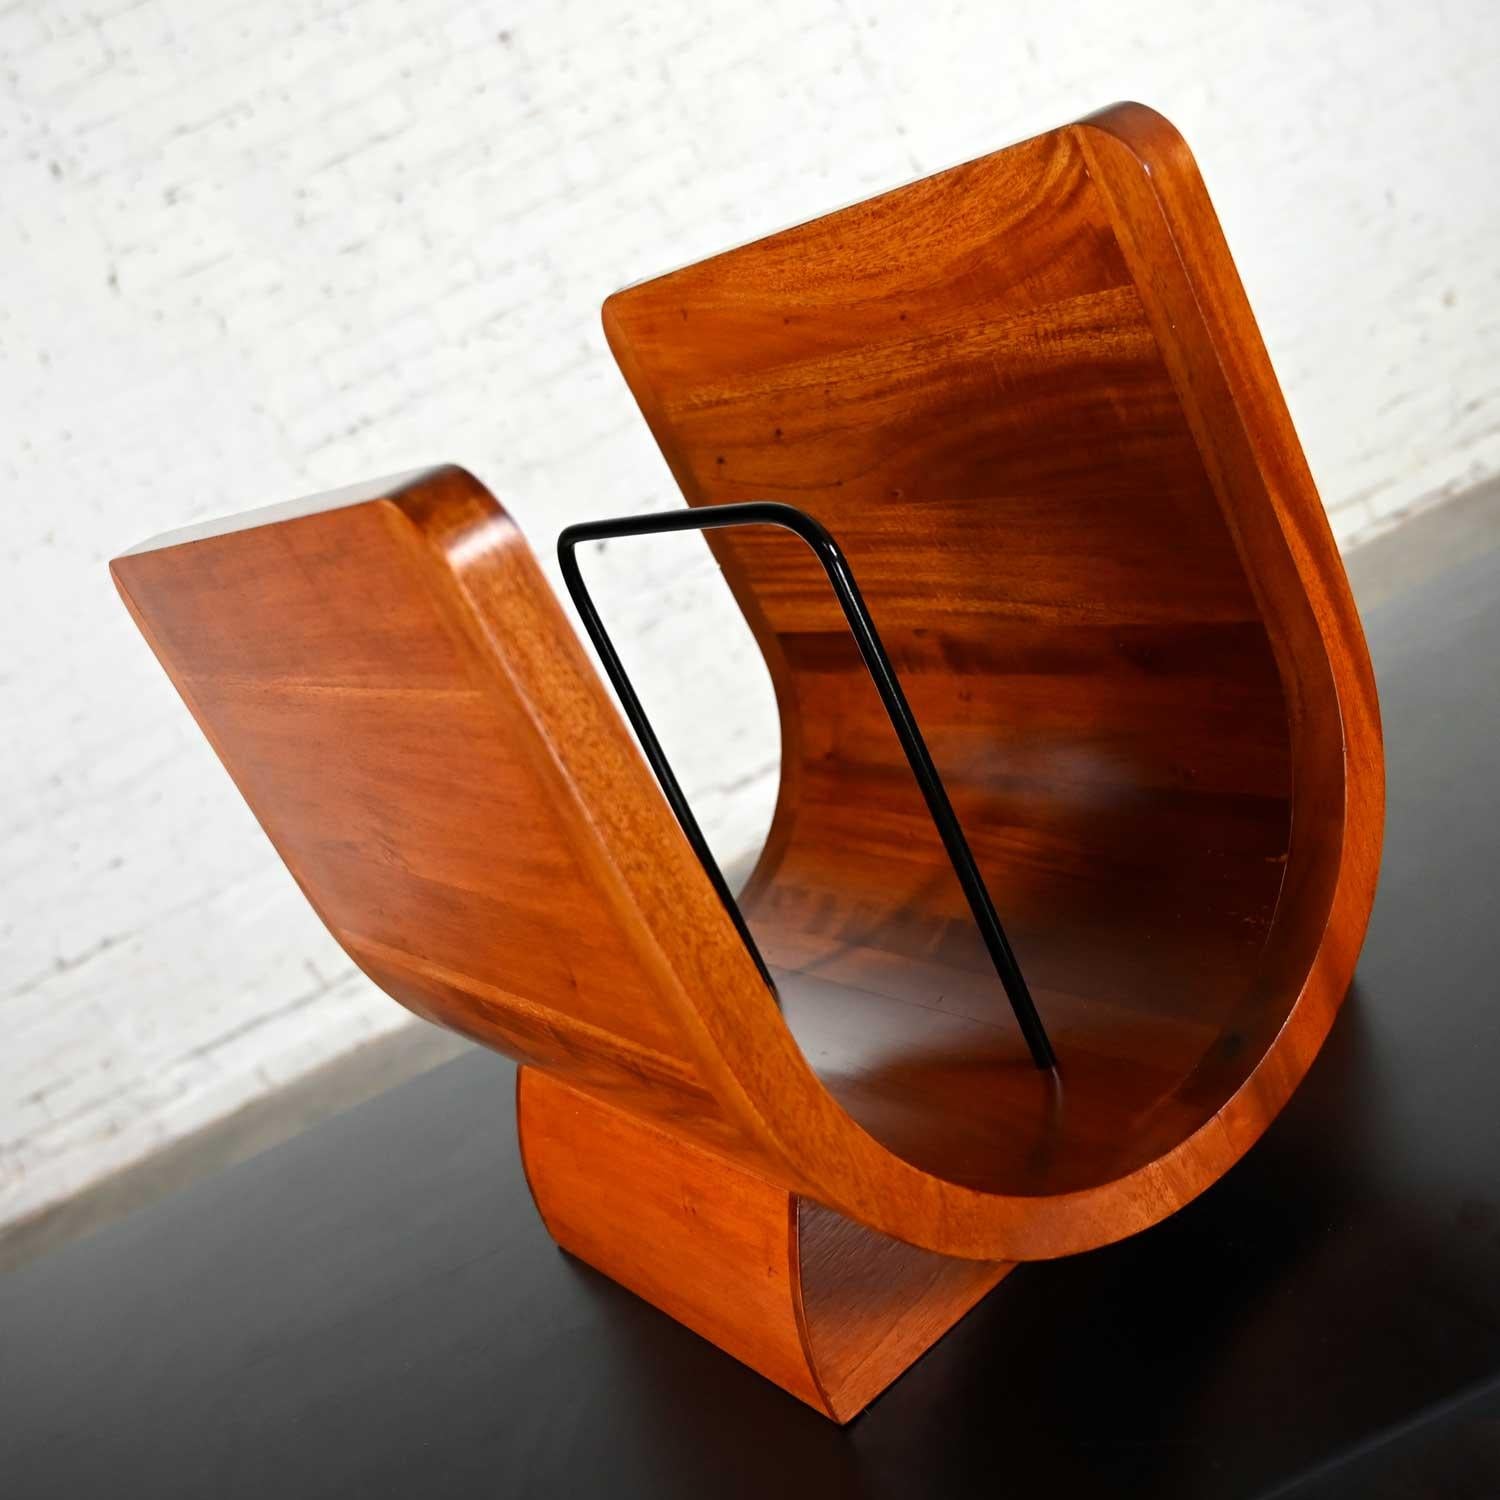 Wonderful solid teak vintage modern u-shaped magazine holder from Frontgate. Beautiful condition, keeping in mind that this is vintage and not new so will have signs of use and wear. Please see photos and zoom in for details. We attempt to portray